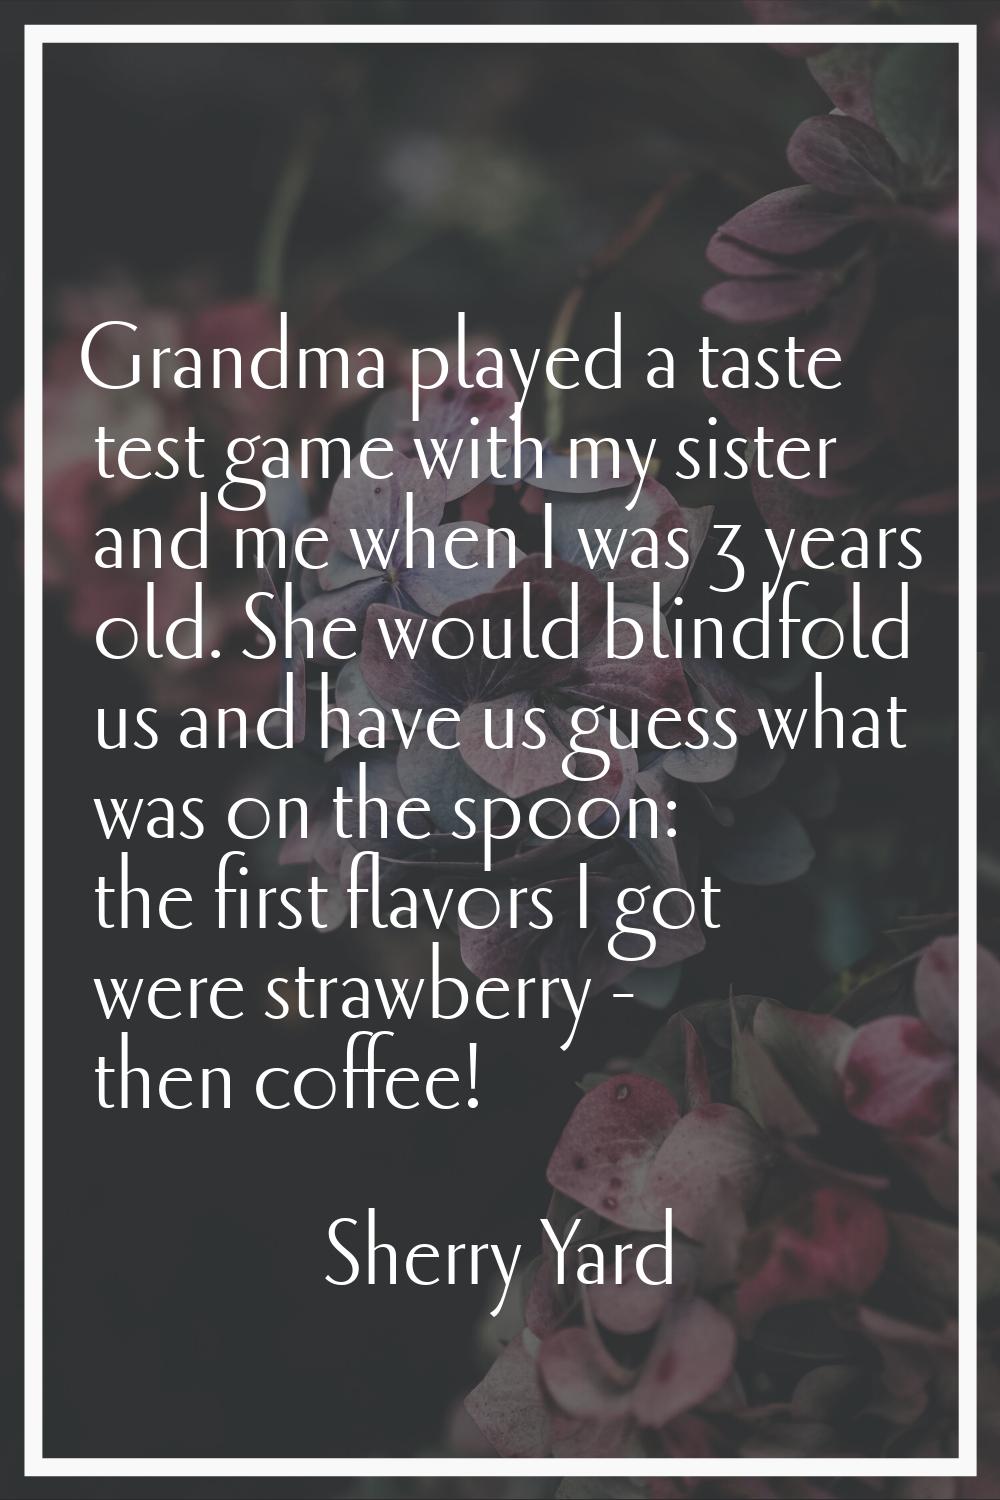 Grandma played a taste test game with my sister and me when I was 3 years old. She would blindfold 